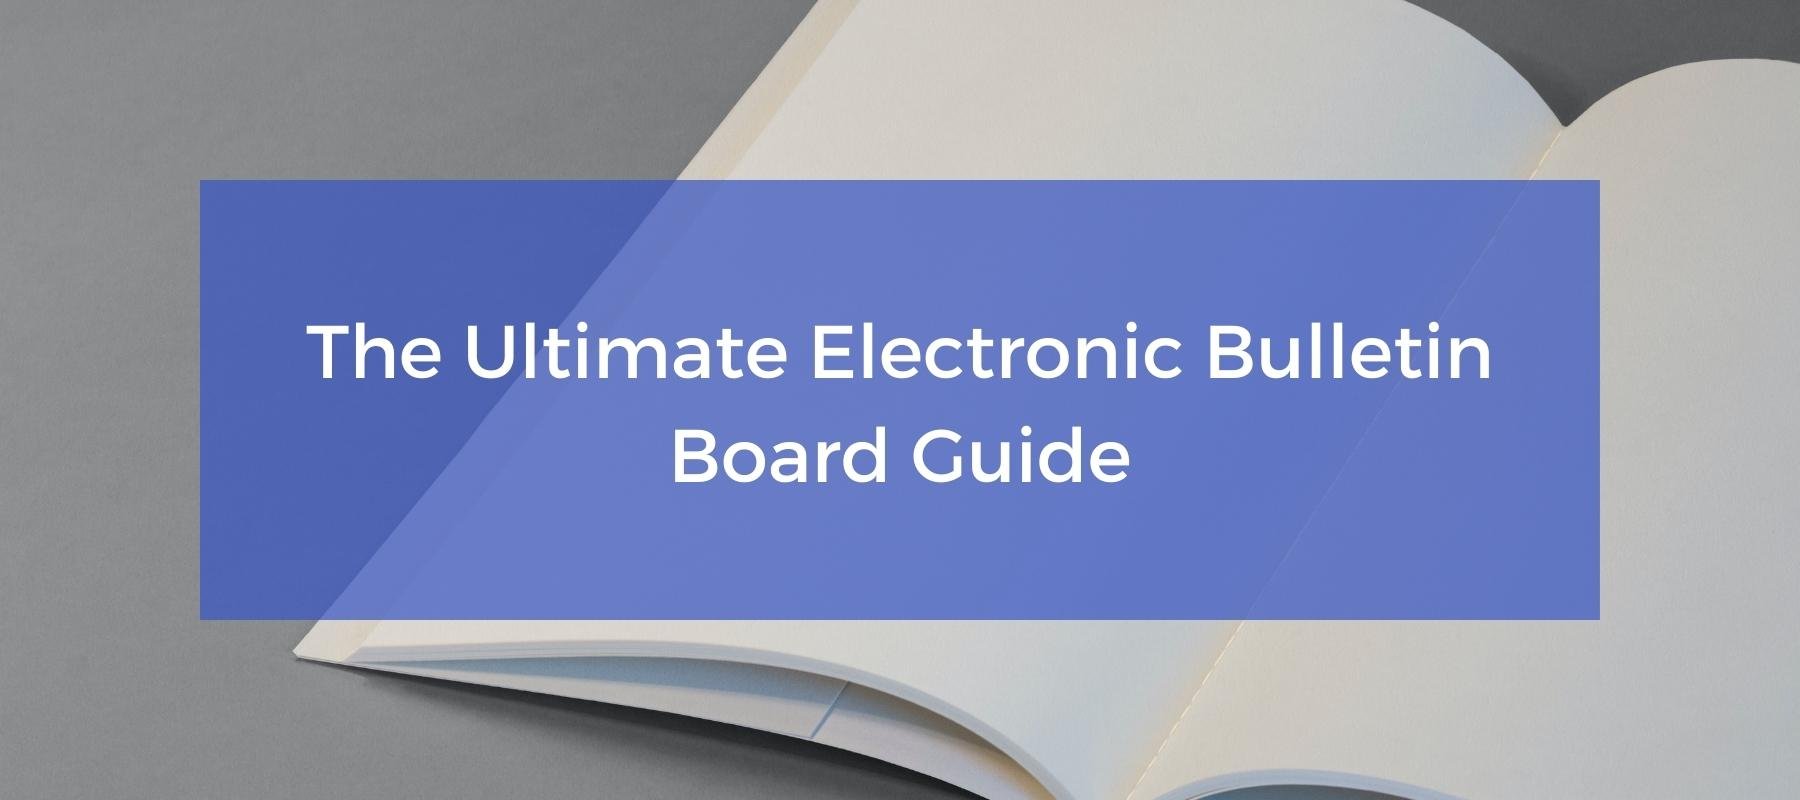 ultimate electronic bulletin board guide text over image of open book